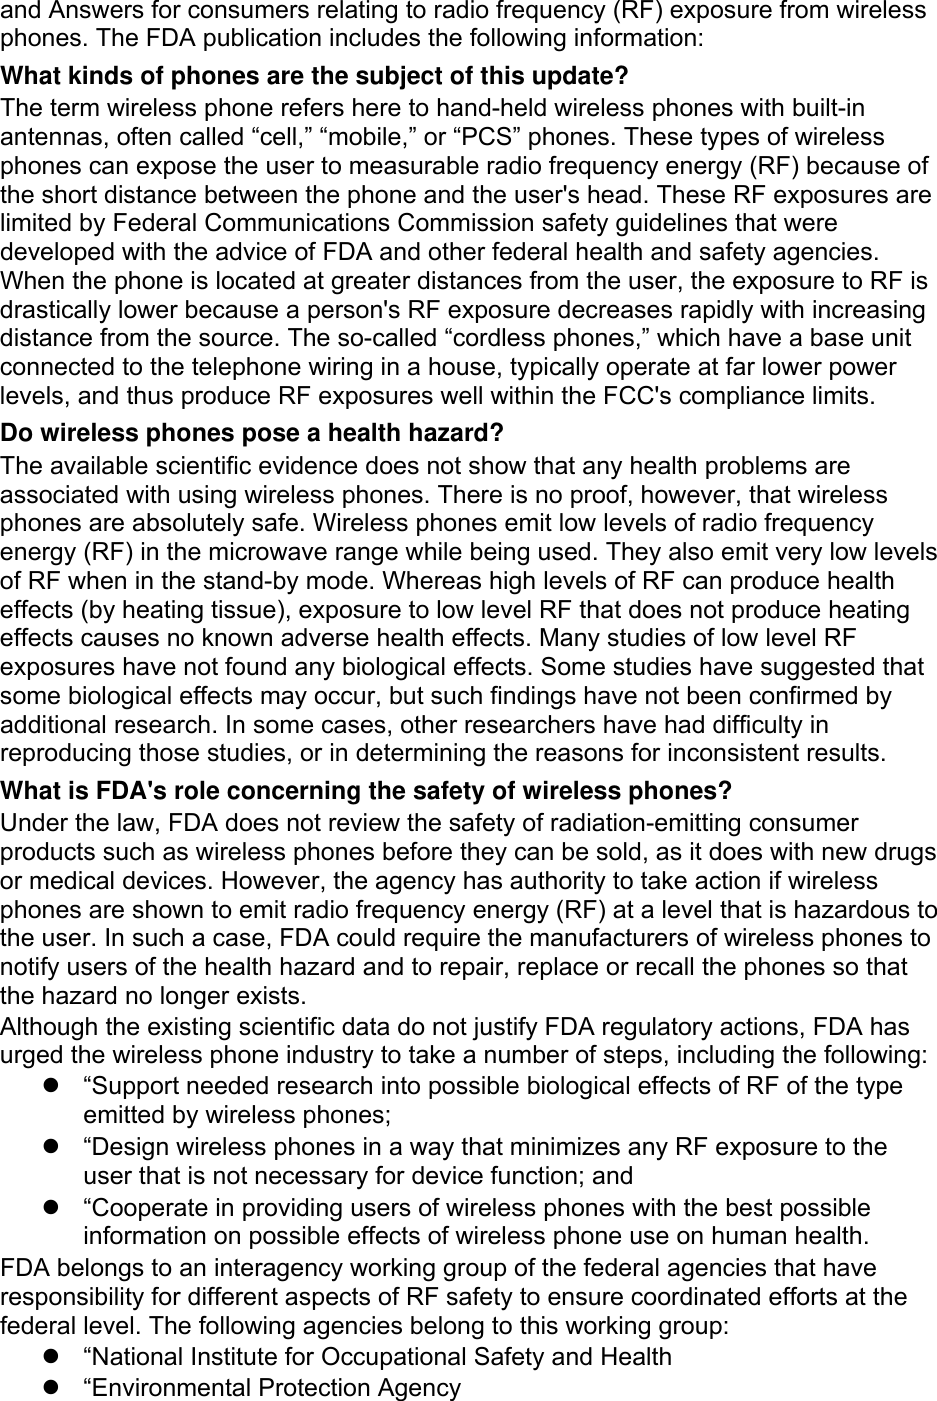 and Answers for consumers relating to radio frequency (RF) exposure from wireless phones. The FDA publication includes the following information: What kinds of phones are the subject of this update? The term wireless phone refers here to hand-held wireless phones with built-in antennas, often called “cell,” “mobile,” or “PCS” phones. These types of wireless phones can expose the user to measurable radio frequency energy (RF) because of the short distance between the phone and the user&apos;s head. These RF exposures are limited by Federal Communications Commission safety guidelines that were developed with the advice of FDA and other federal health and safety agencies. When the phone is located at greater distances from the user, the exposure to RF is drastically lower because a person&apos;s RF exposure decreases rapidly with increasing distance from the source. The so-called “cordless phones,” which have a base unit connected to the telephone wiring in a house, typically operate at far lower power levels, and thus produce RF exposures well within the FCC&apos;s compliance limits. Do wireless phones pose a health hazard? The available scientific evidence does not show that any health problems are associated with using wireless phones. There is no proof, however, that wireless phones are absolutely safe. Wireless phones emit low levels of radio frequency energy (RF) in the microwave range while being used. They also emit very low levels of RF when in the stand-by mode. Whereas high levels of RF can produce health effects (by heating tissue), exposure to low level RF that does not produce heating effects causes no known adverse health effects. Many studies of low level RF exposures have not found any biological effects. Some studies have suggested that some biological effects may occur, but such findings have not been confirmed by additional research. In some cases, other researchers have had difficulty in reproducing those studies, or in determining the reasons for inconsistent results. What is FDA&apos;s role concerning the safety of wireless phones? Under the law, FDA does not review the safety of radiation-emitting consumer products such as wireless phones before they can be sold, as it does with new drugs or medical devices. However, the agency has authority to take action if wireless phones are shown to emit radio frequency energy (RF) at a level that is hazardous to the user. In such a case, FDA could require the manufacturers of wireless phones to notify users of the health hazard and to repair, replace or recall the phones so that the hazard no longer exists. Although the existing scientific data do not justify FDA regulatory actions, FDA has urged the wireless phone industry to take a number of steps, including the following: z  “Support needed research into possible biological effects of RF of the type emitted by wireless phones; z  “Design wireless phones in a way that minimizes any RF exposure to the user that is not necessary for device function; and z  “Cooperate in providing users of wireless phones with the best possible information on possible effects of wireless phone use on human health. FDA belongs to an interagency working group of the federal agencies that have responsibility for different aspects of RF safety to ensure coordinated efforts at the federal level. The following agencies belong to this working group: z  “National Institute for Occupational Safety and Health z  “Environmental Protection Agency 